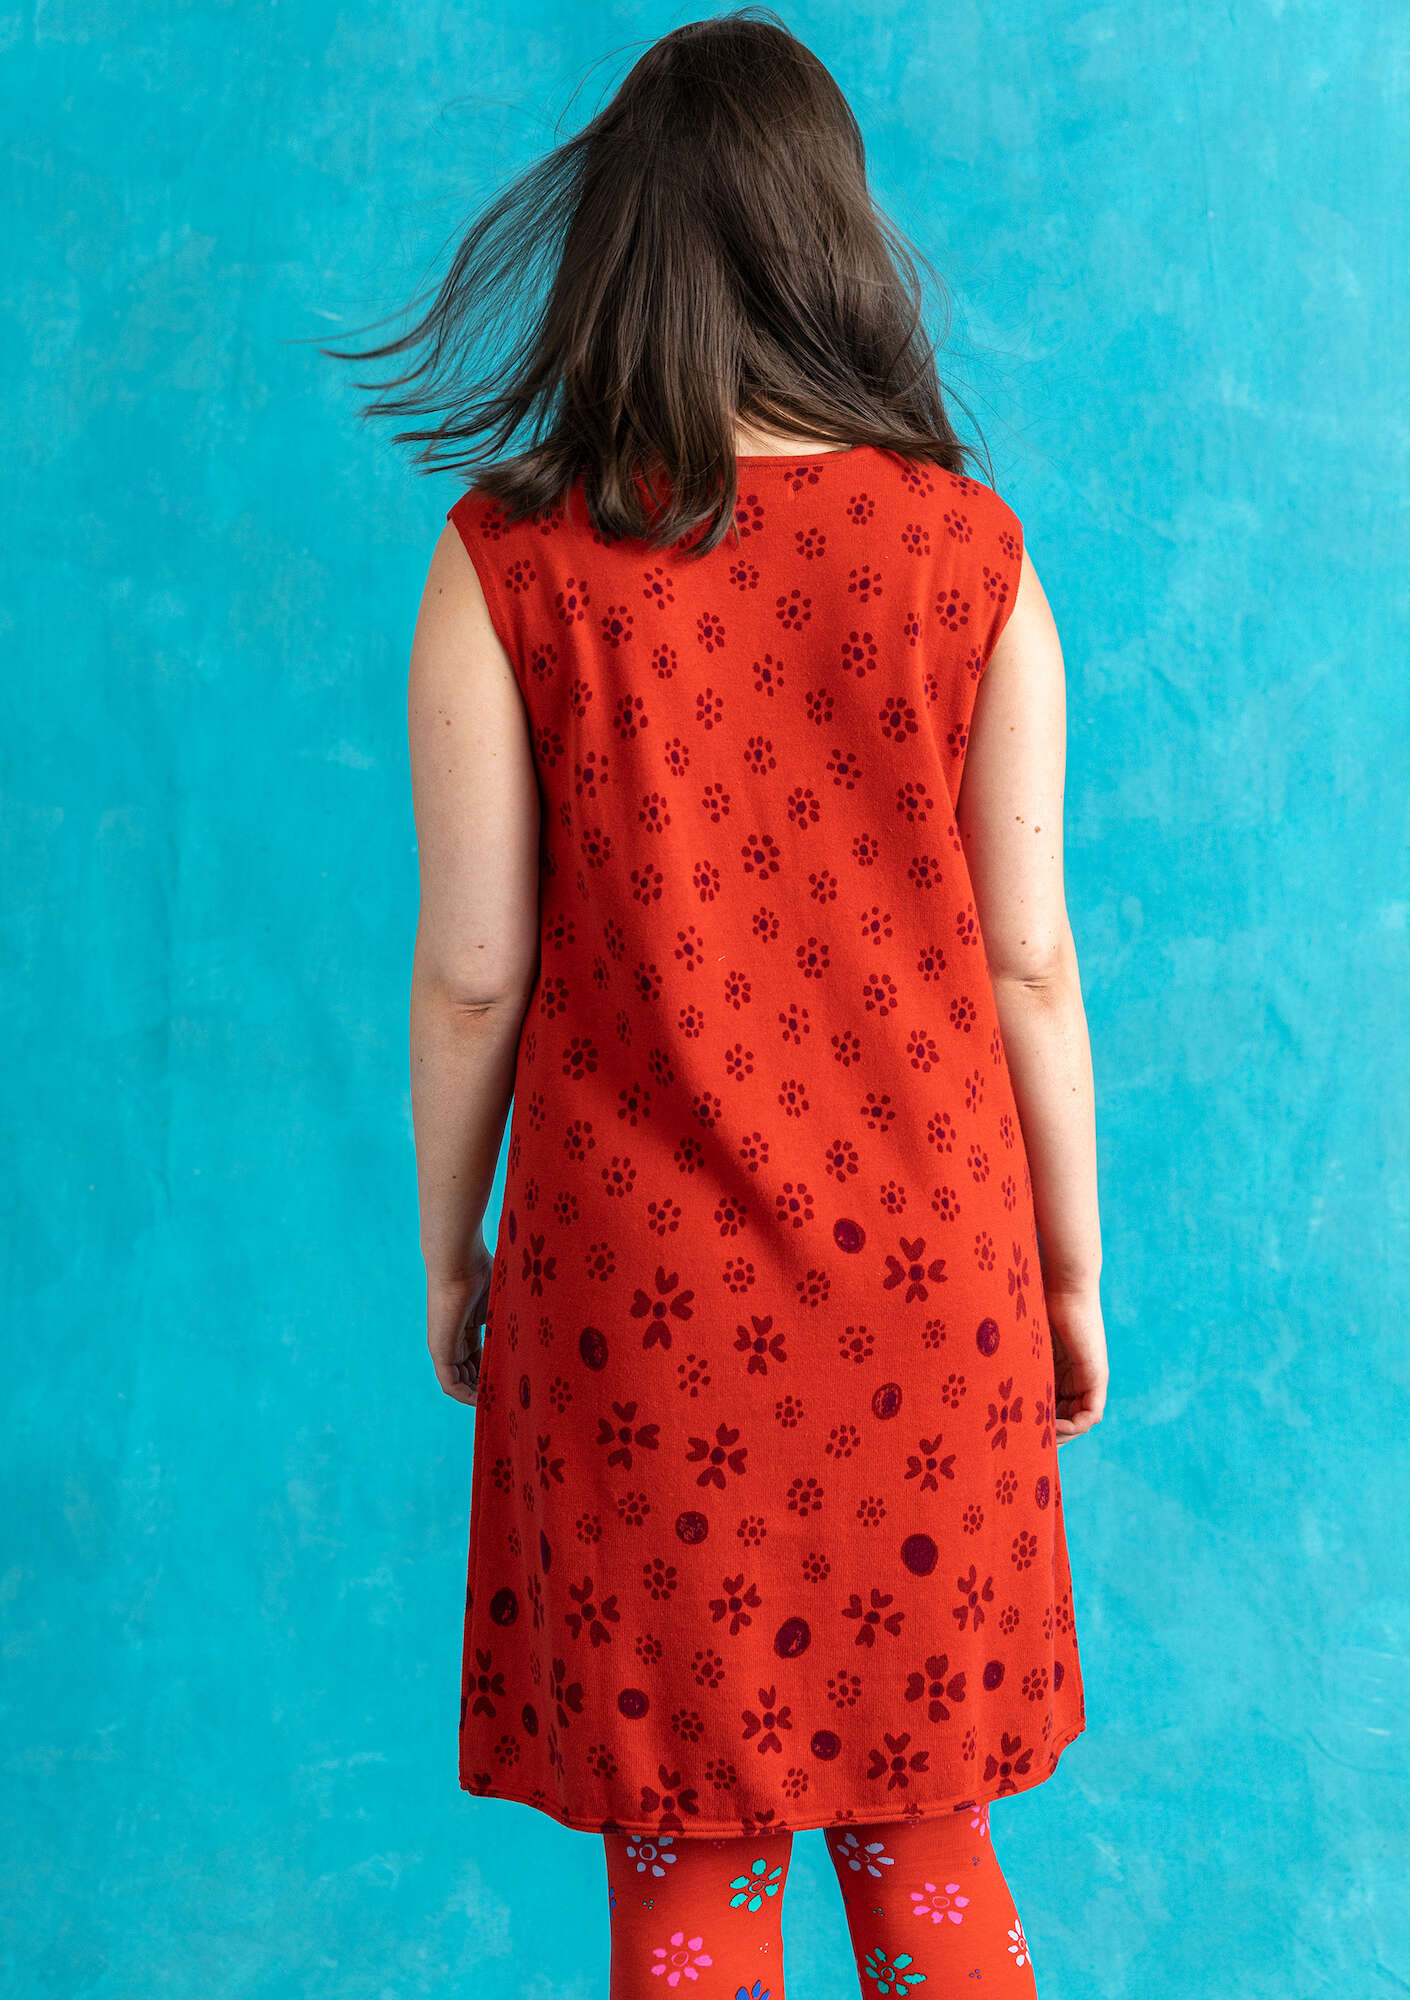 “Iris” knit fabric tunic in organic/recycled cotton parrot red/patterned thumbnail